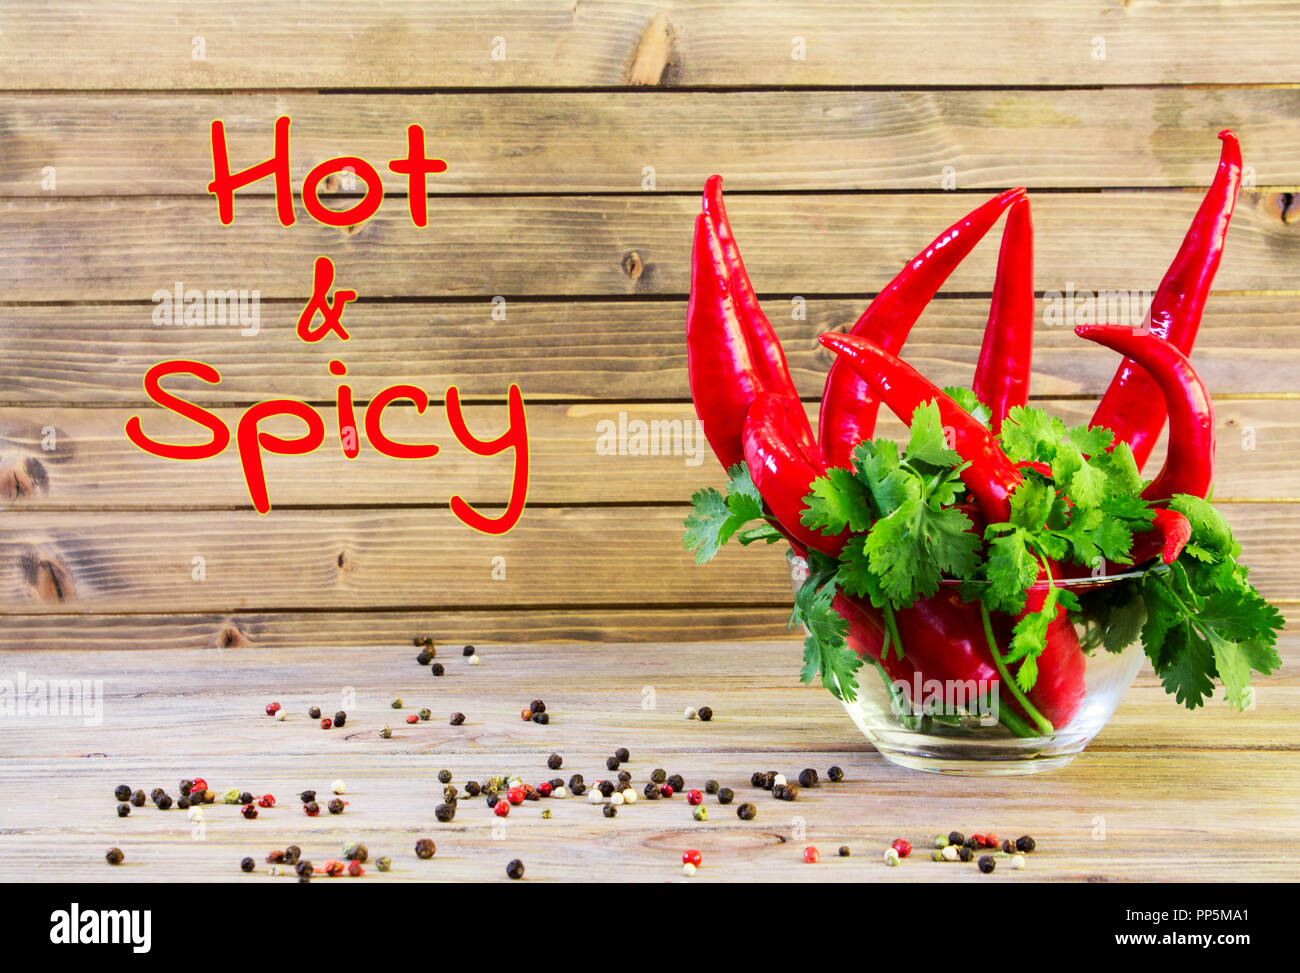 Red chili pepper and greenery on wooden background Close up Stock Photo